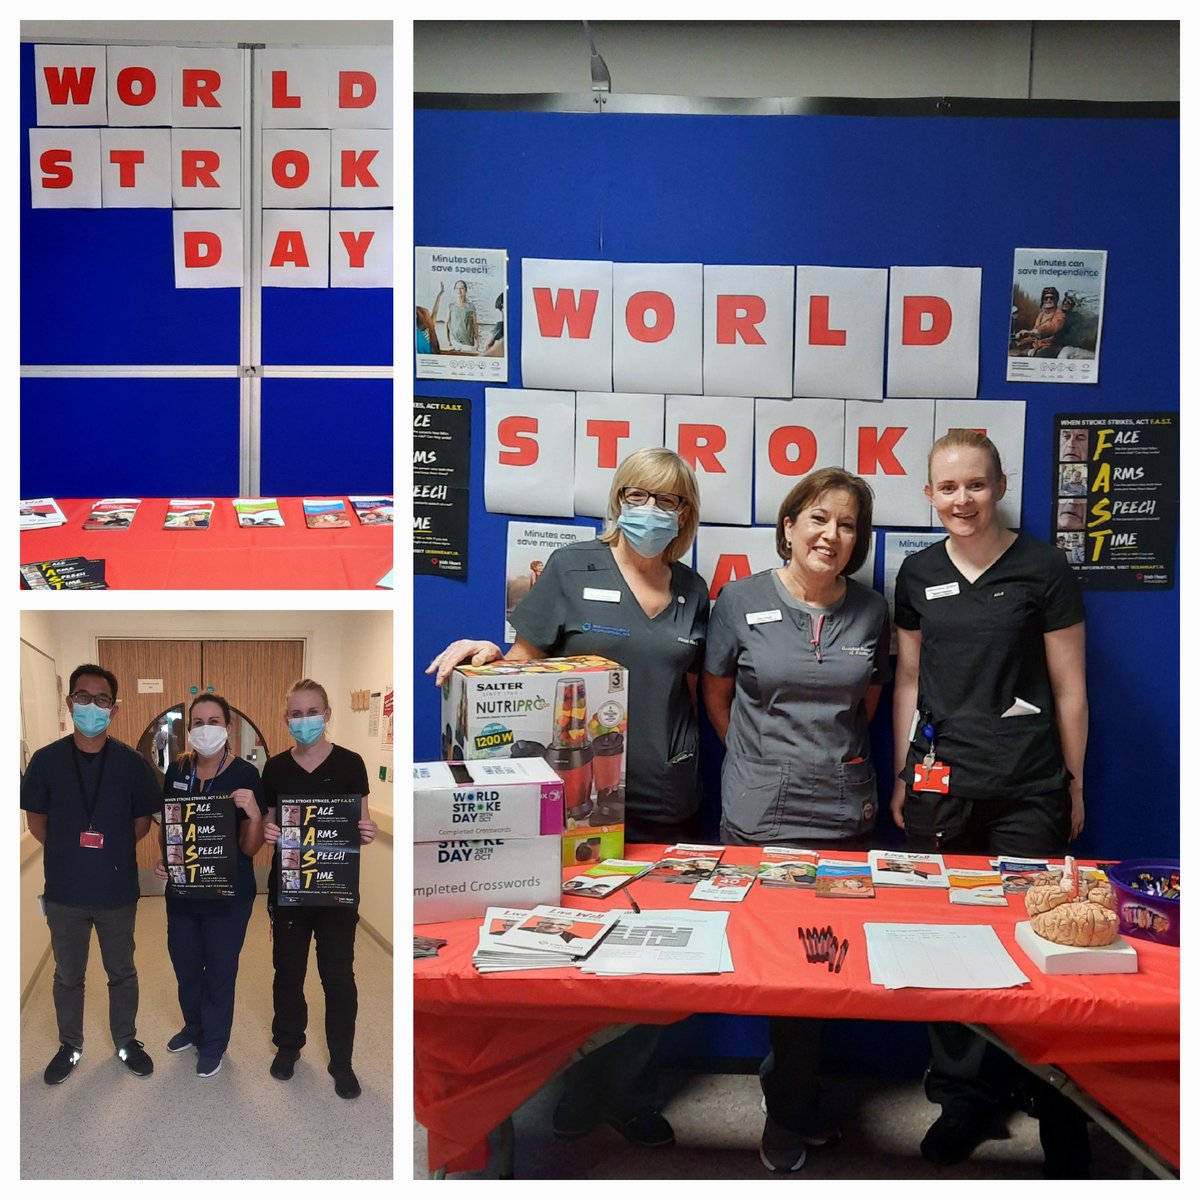 Happy World Stroke Day from Drogheda where a day of education and fun is underway #worldstokecampagim @NursingOlol @PTOLOLH @OTLouthHosps @OlolRadiology